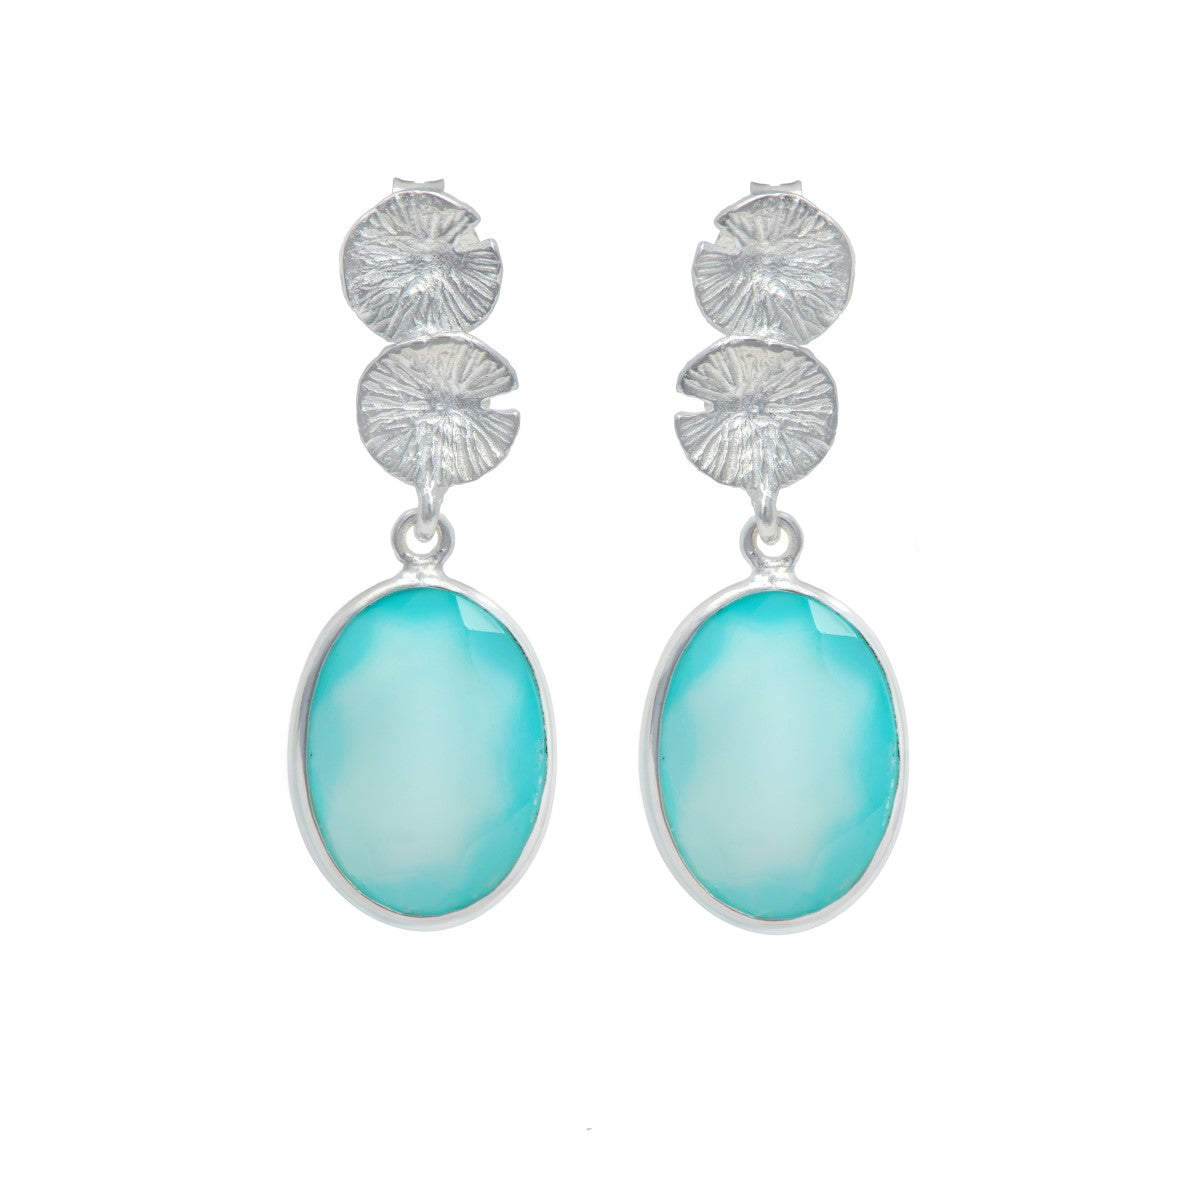 Lily Pad Earrings in Sterling Silver with an Aqua Chalcedony Gemstone Drop